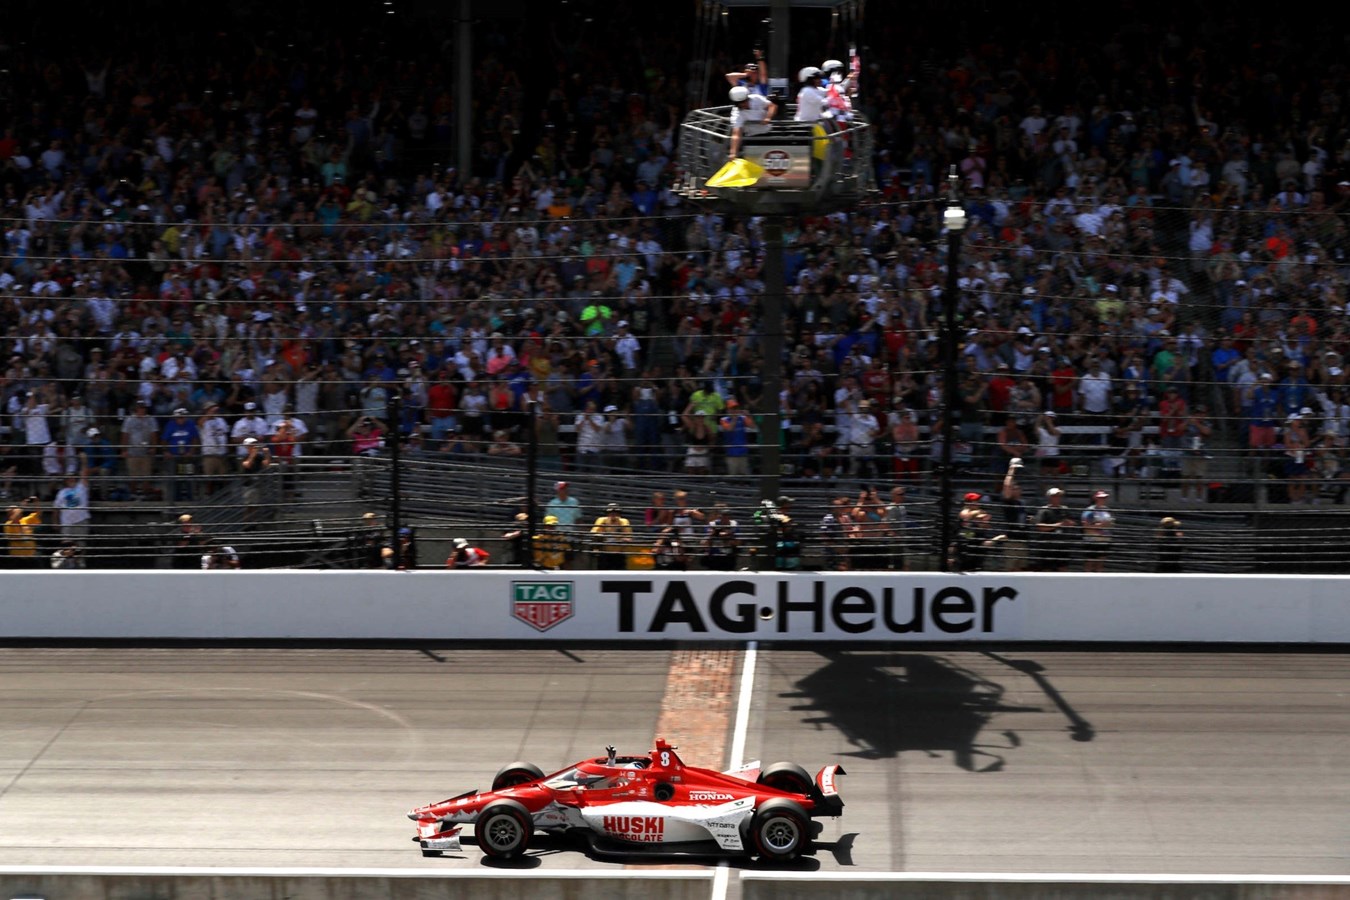 Marcus Ericsson takes his Chip Ganassi Racing Honda to victory in the